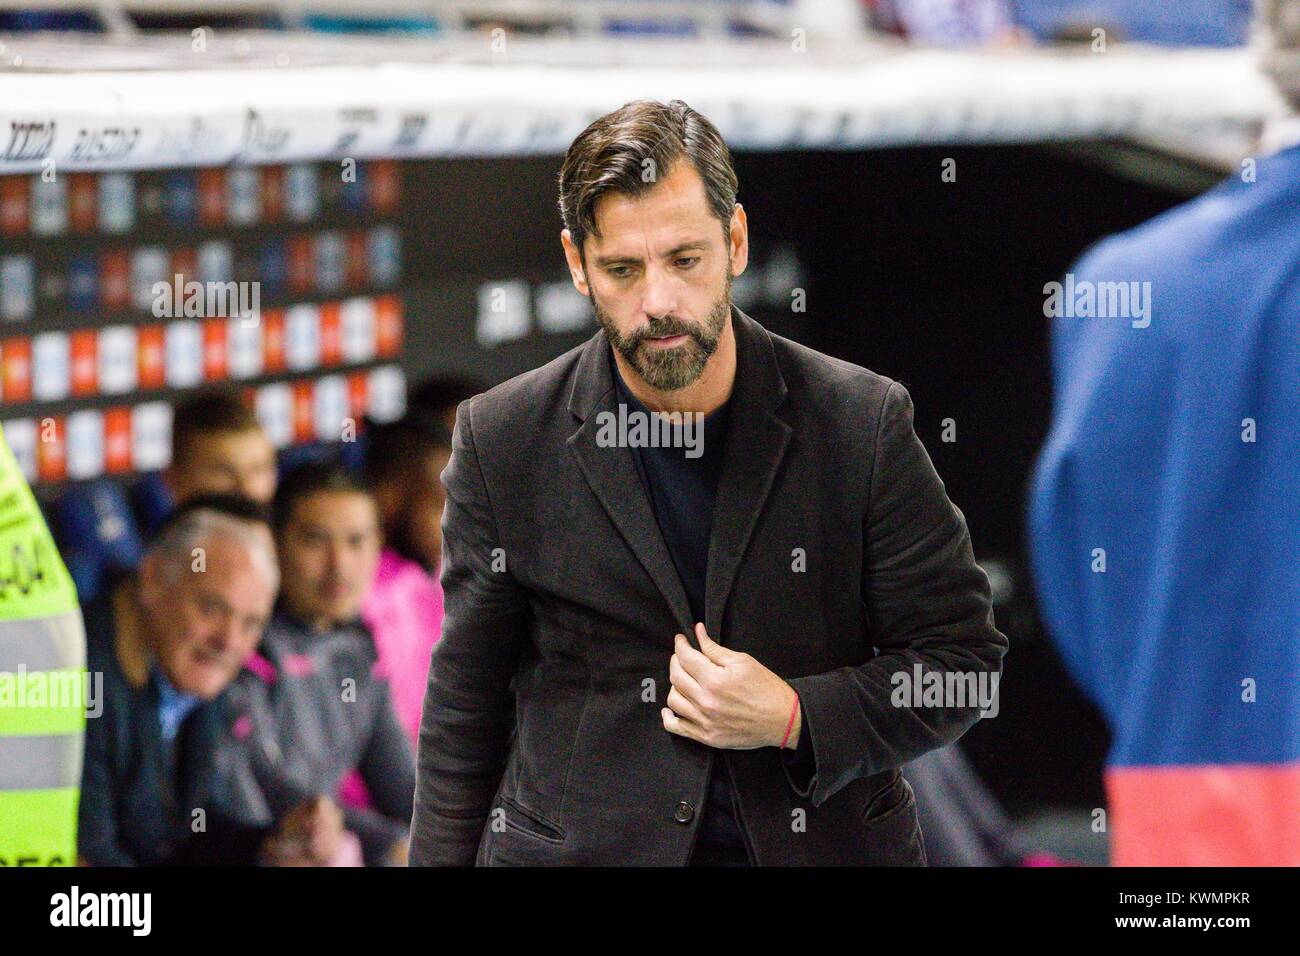 Barcelona, Spain. 04th Jan, 2018. RCD Espanyol coach Quique Sanchez Flores (c) during the match between RCD Espanyol v Levante, for the round of 16 (1st leg) of the King's cup, played at RCDE Stadium on 4th January 2018 in Barcelona, Spain. (Credit: GTO/Urbanandsport/Gtres Online) Credit: Gtres Información más Comuniación on line, S.L./Alamy Live News Stock Photo